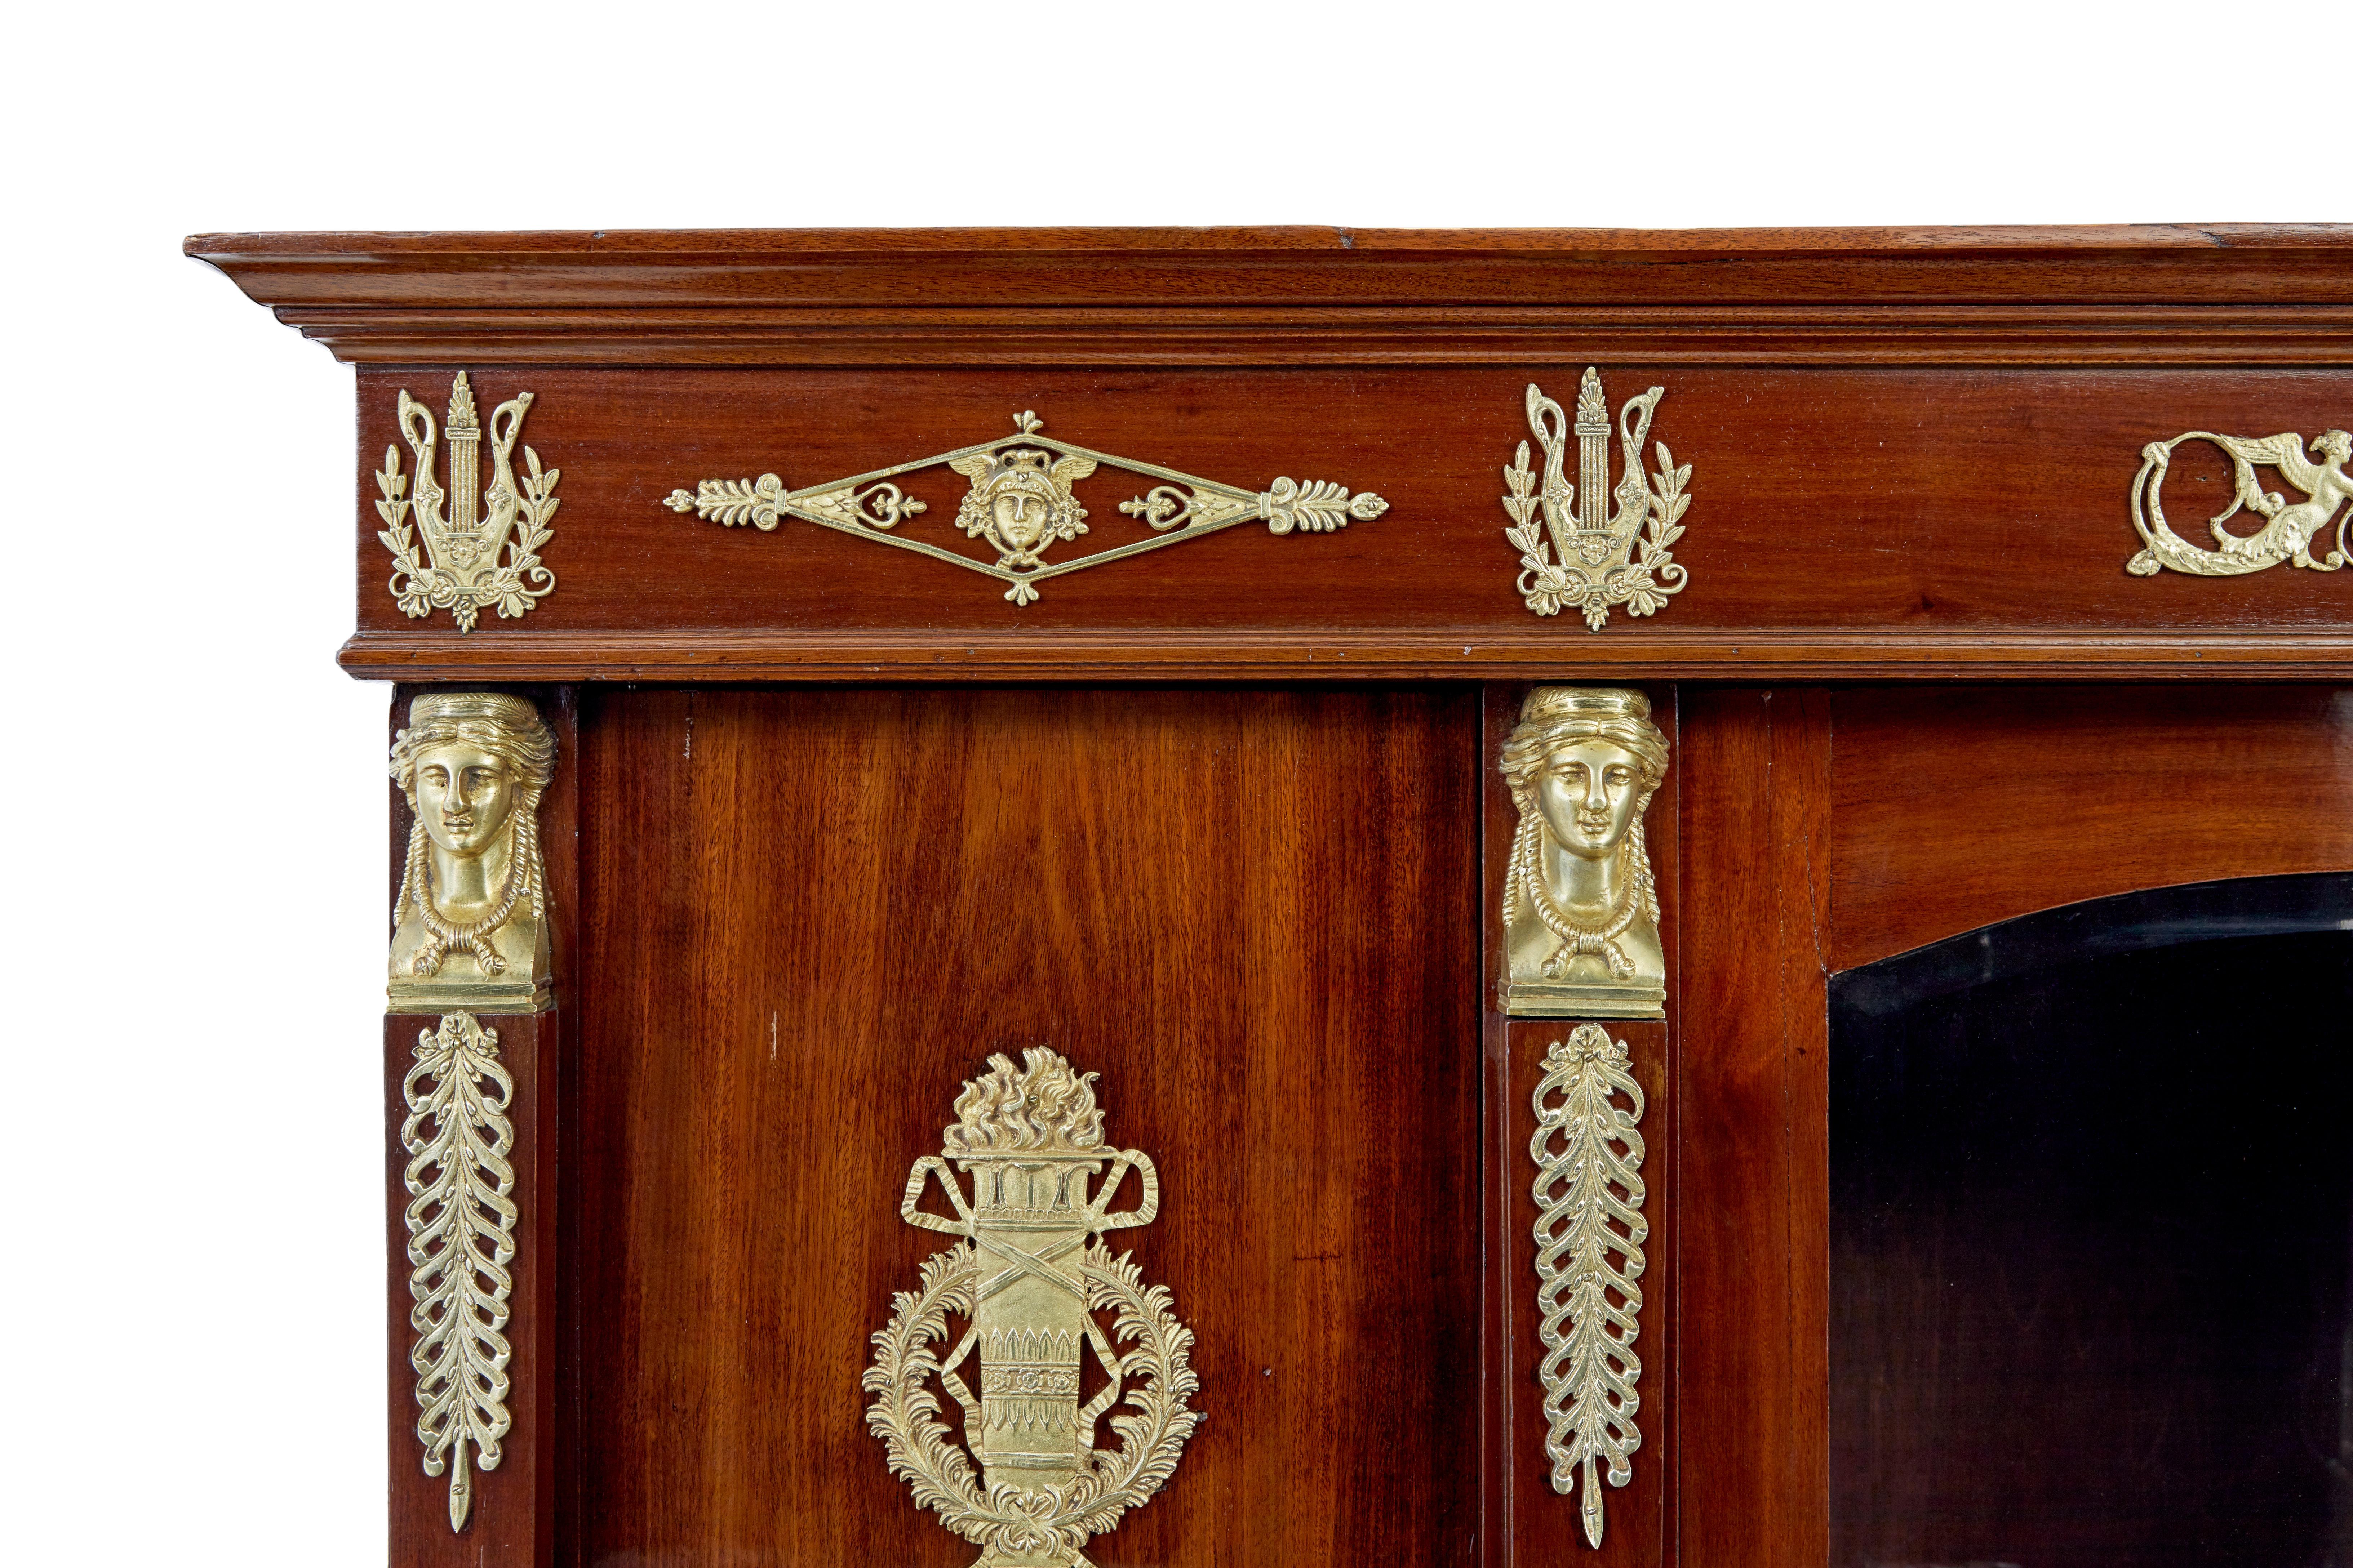 Ormolu Late 19th century French empire mahogany and ormolu cabinet For Sale